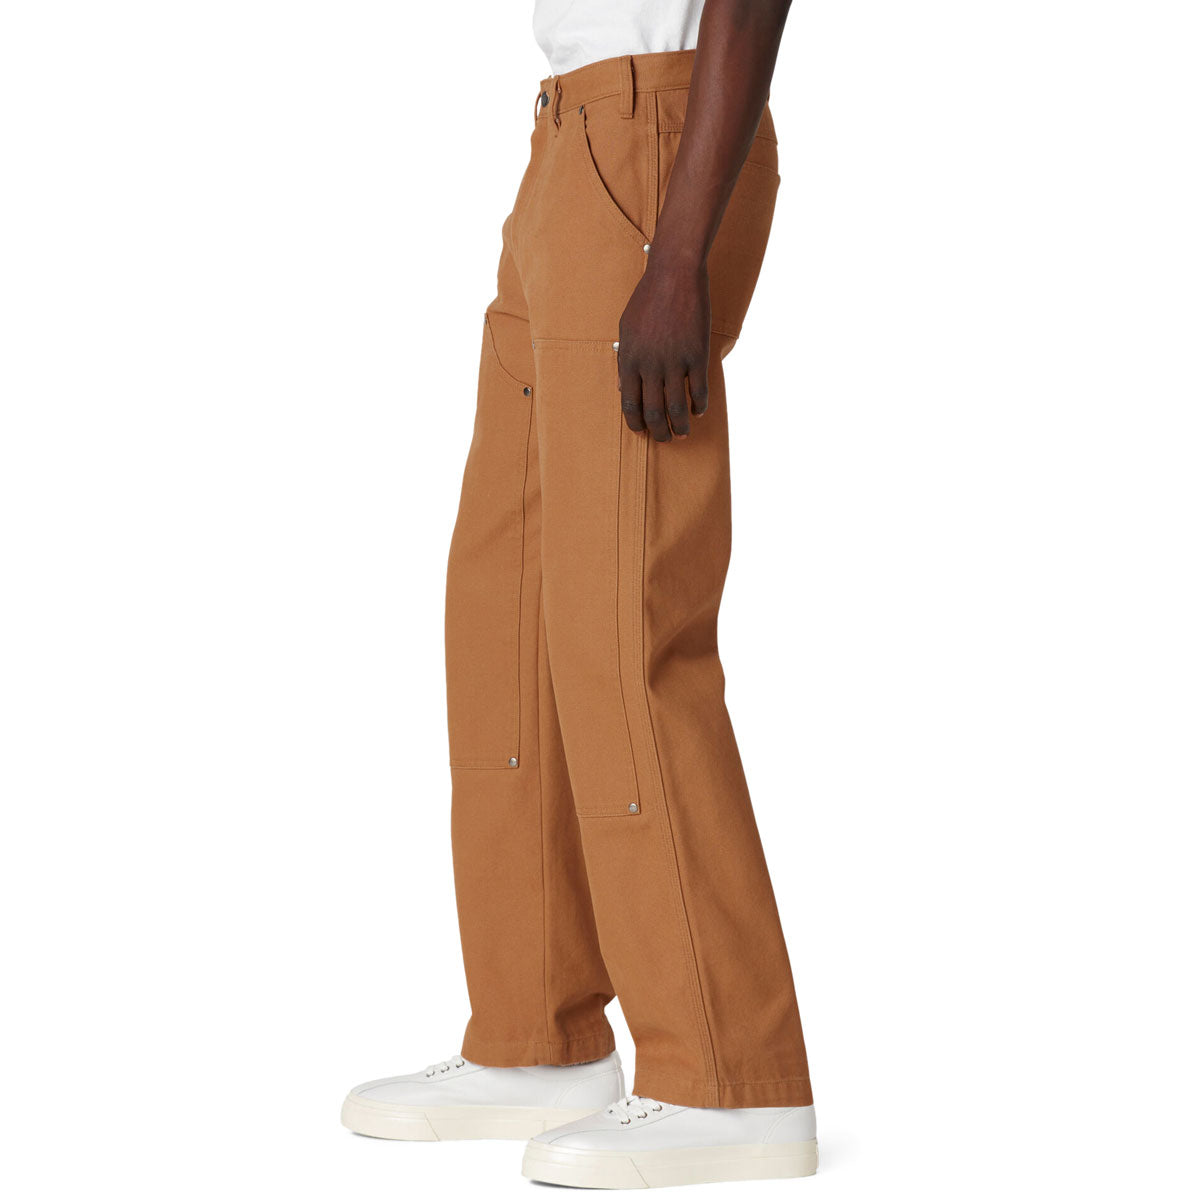 Dickies Double Front Duck Pants - Stonewashed Brown Duck image 3